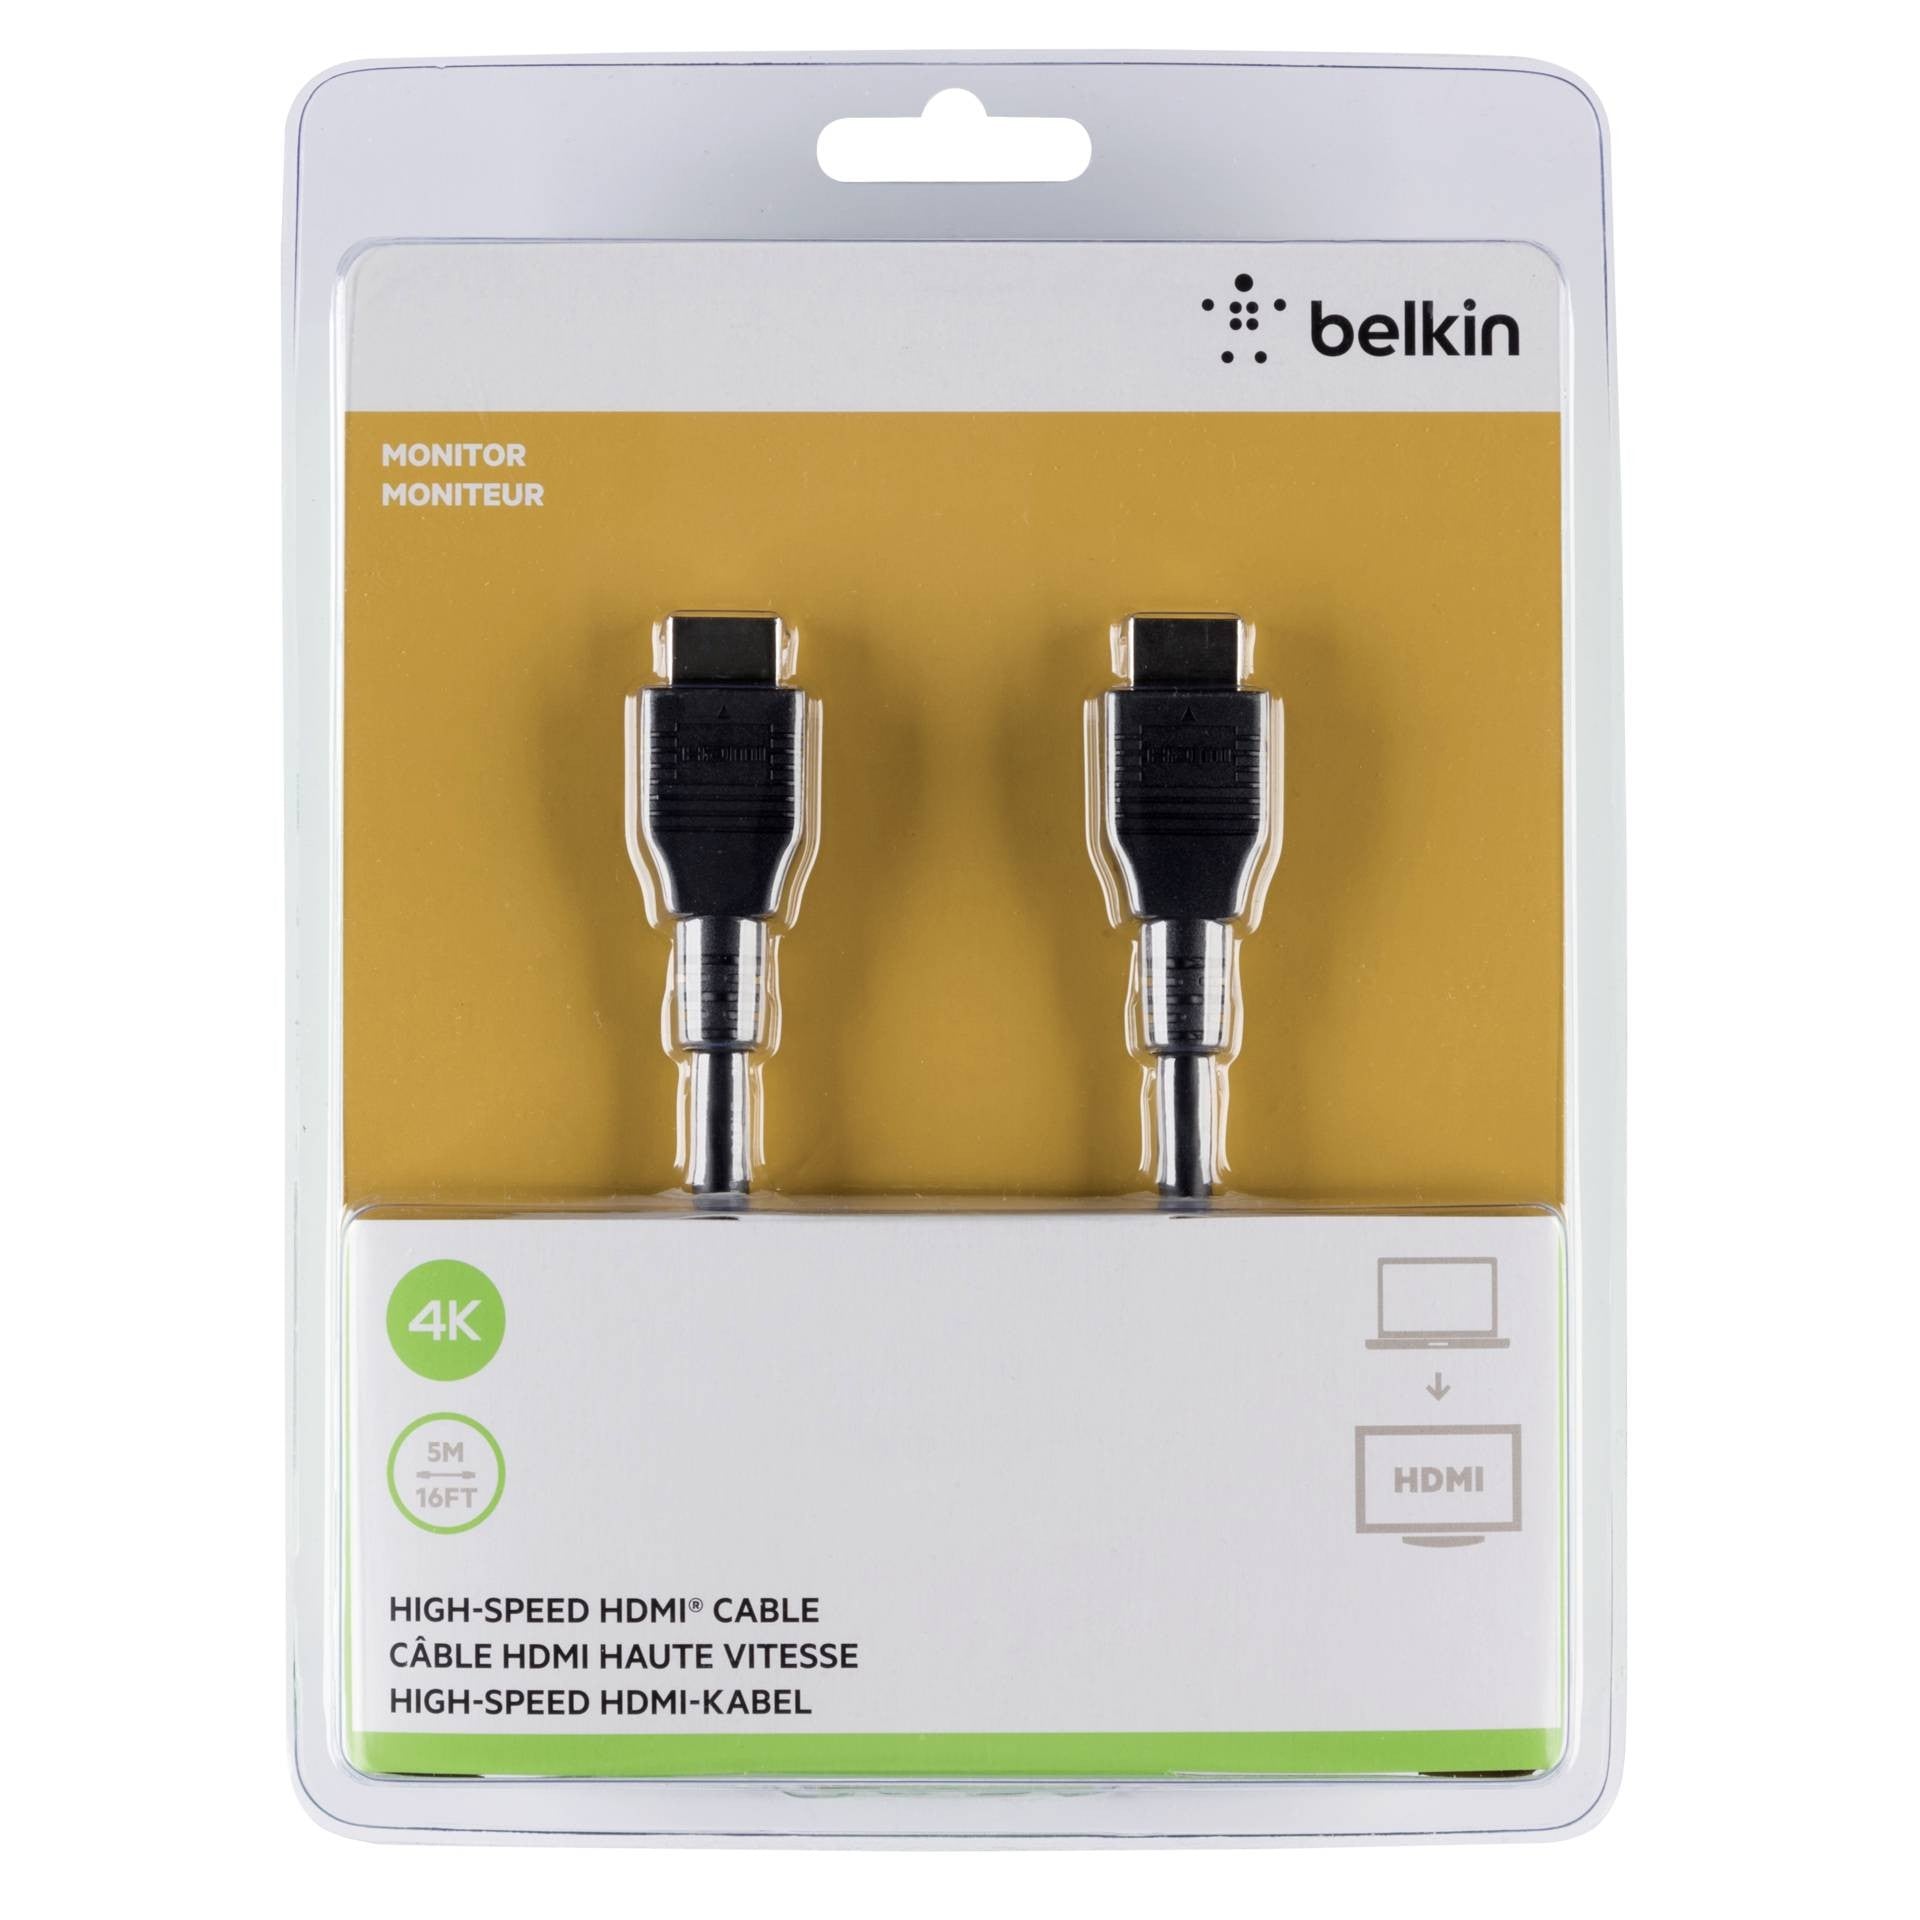 Belkin-HDMI TO HDMI Cable 4K High Speed 5MTR